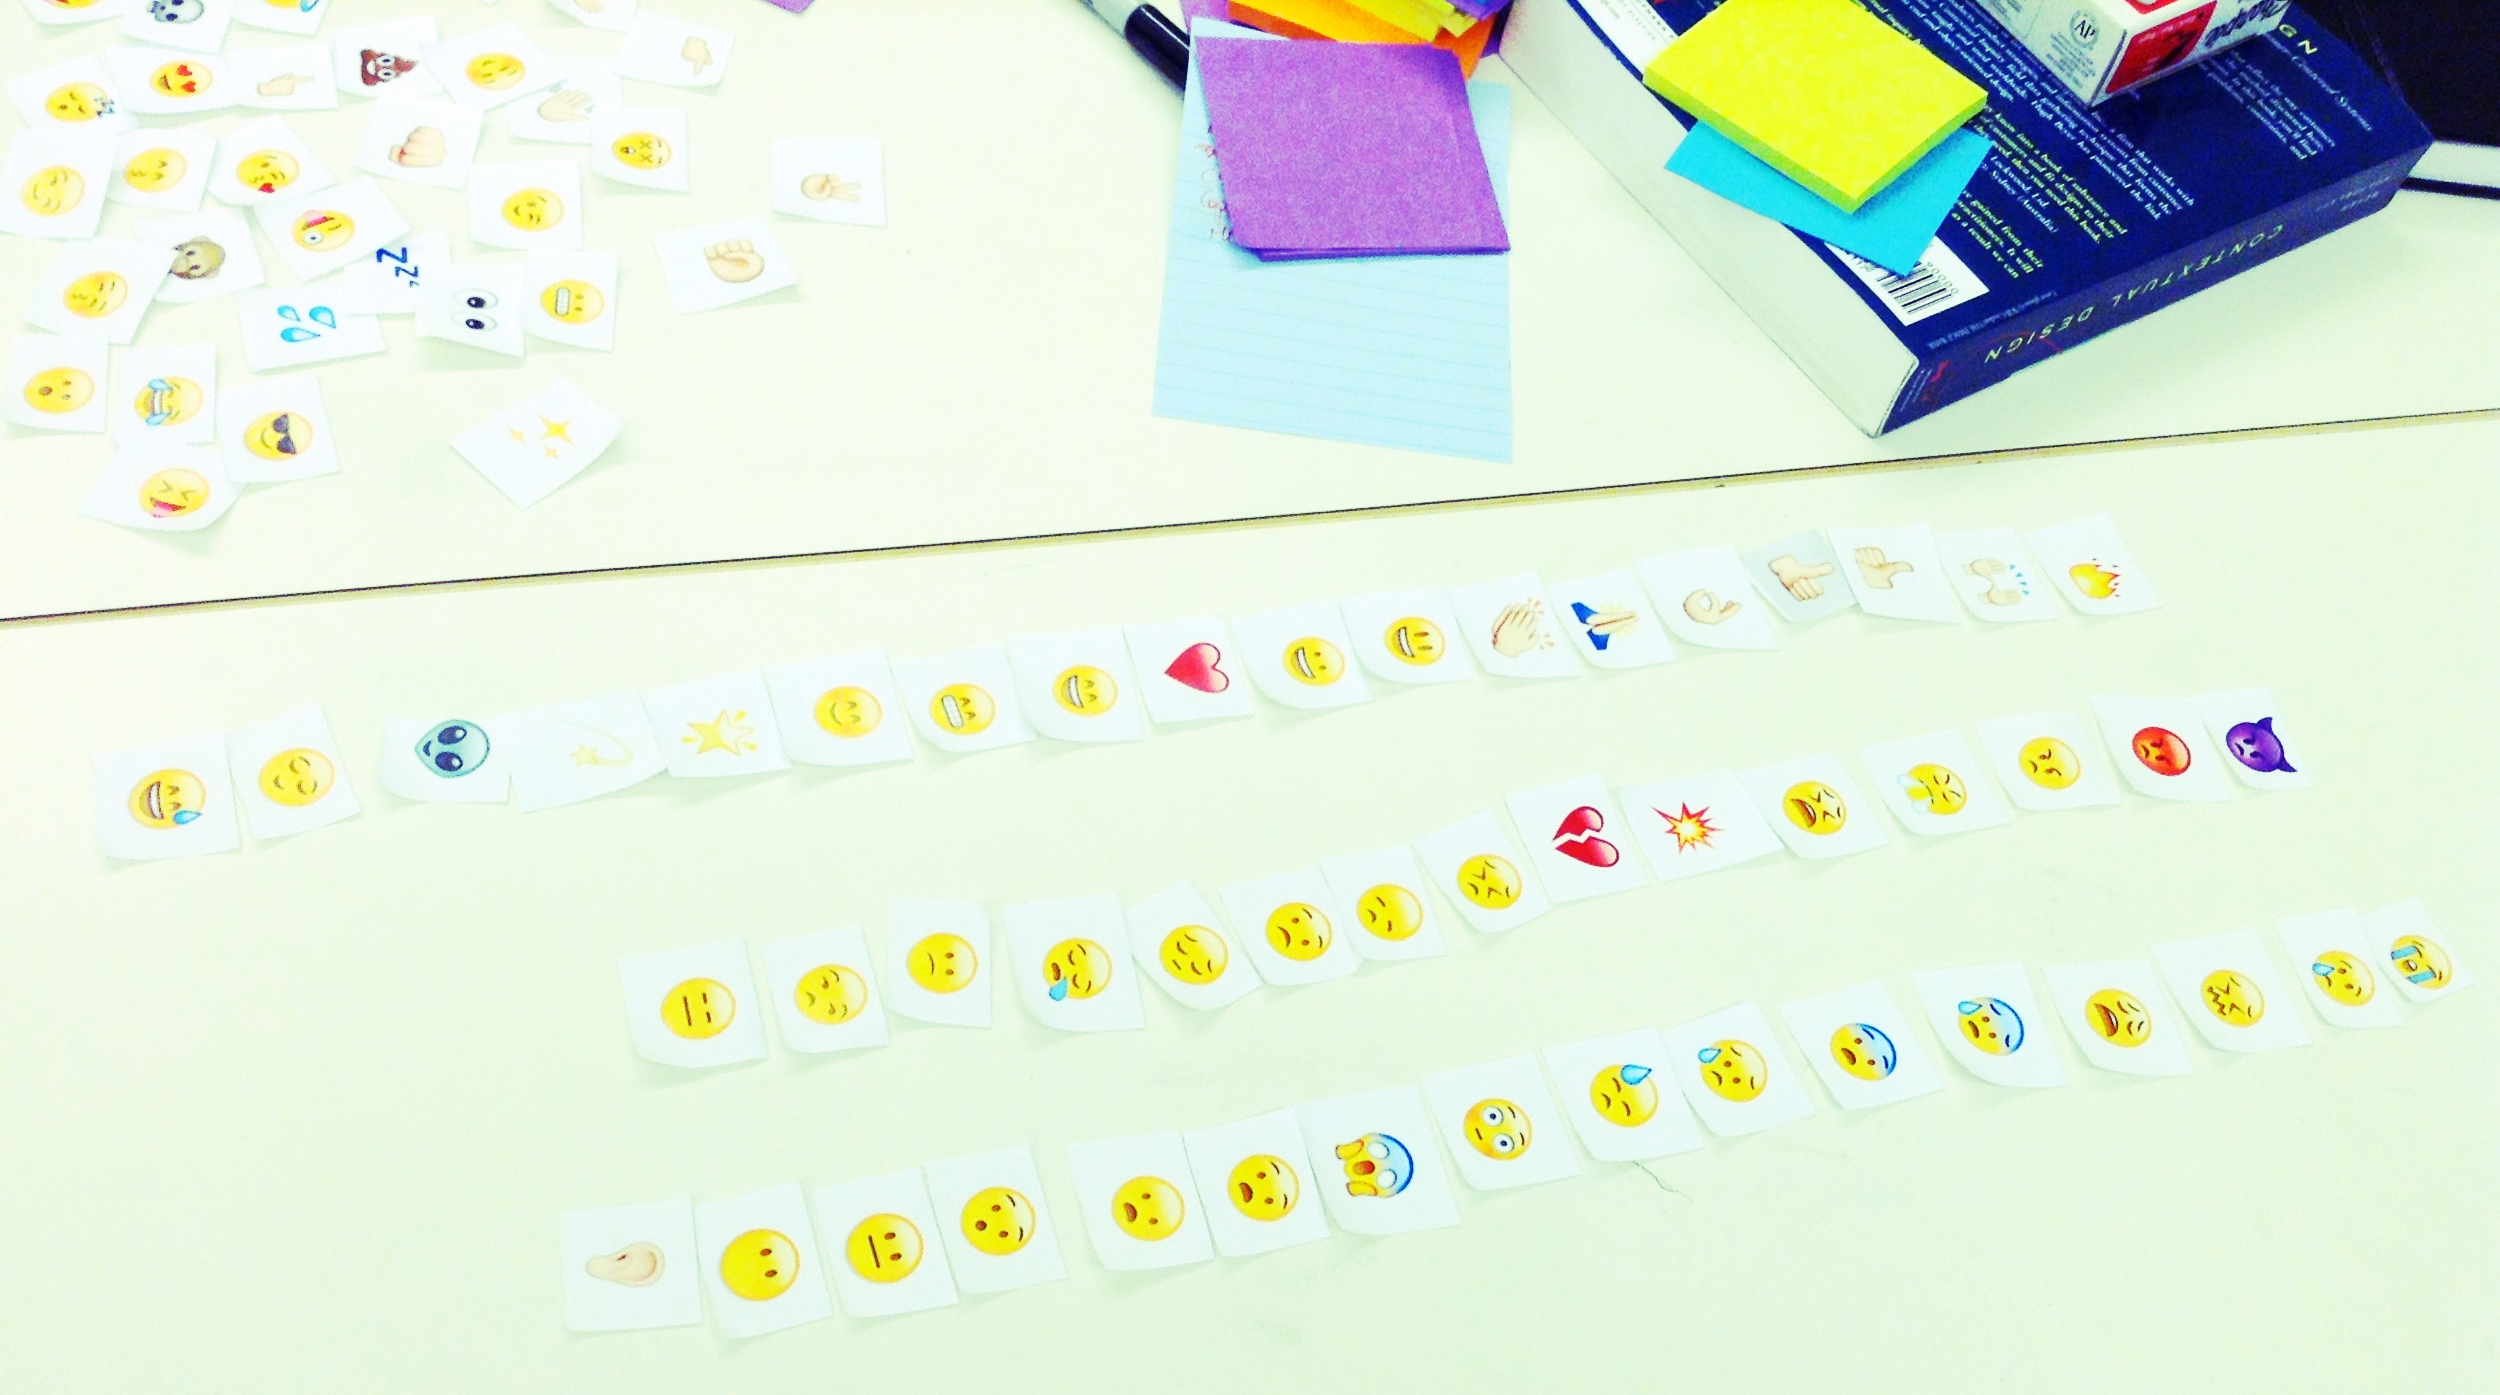 Card sorting of emojis by a participant with Western culture background